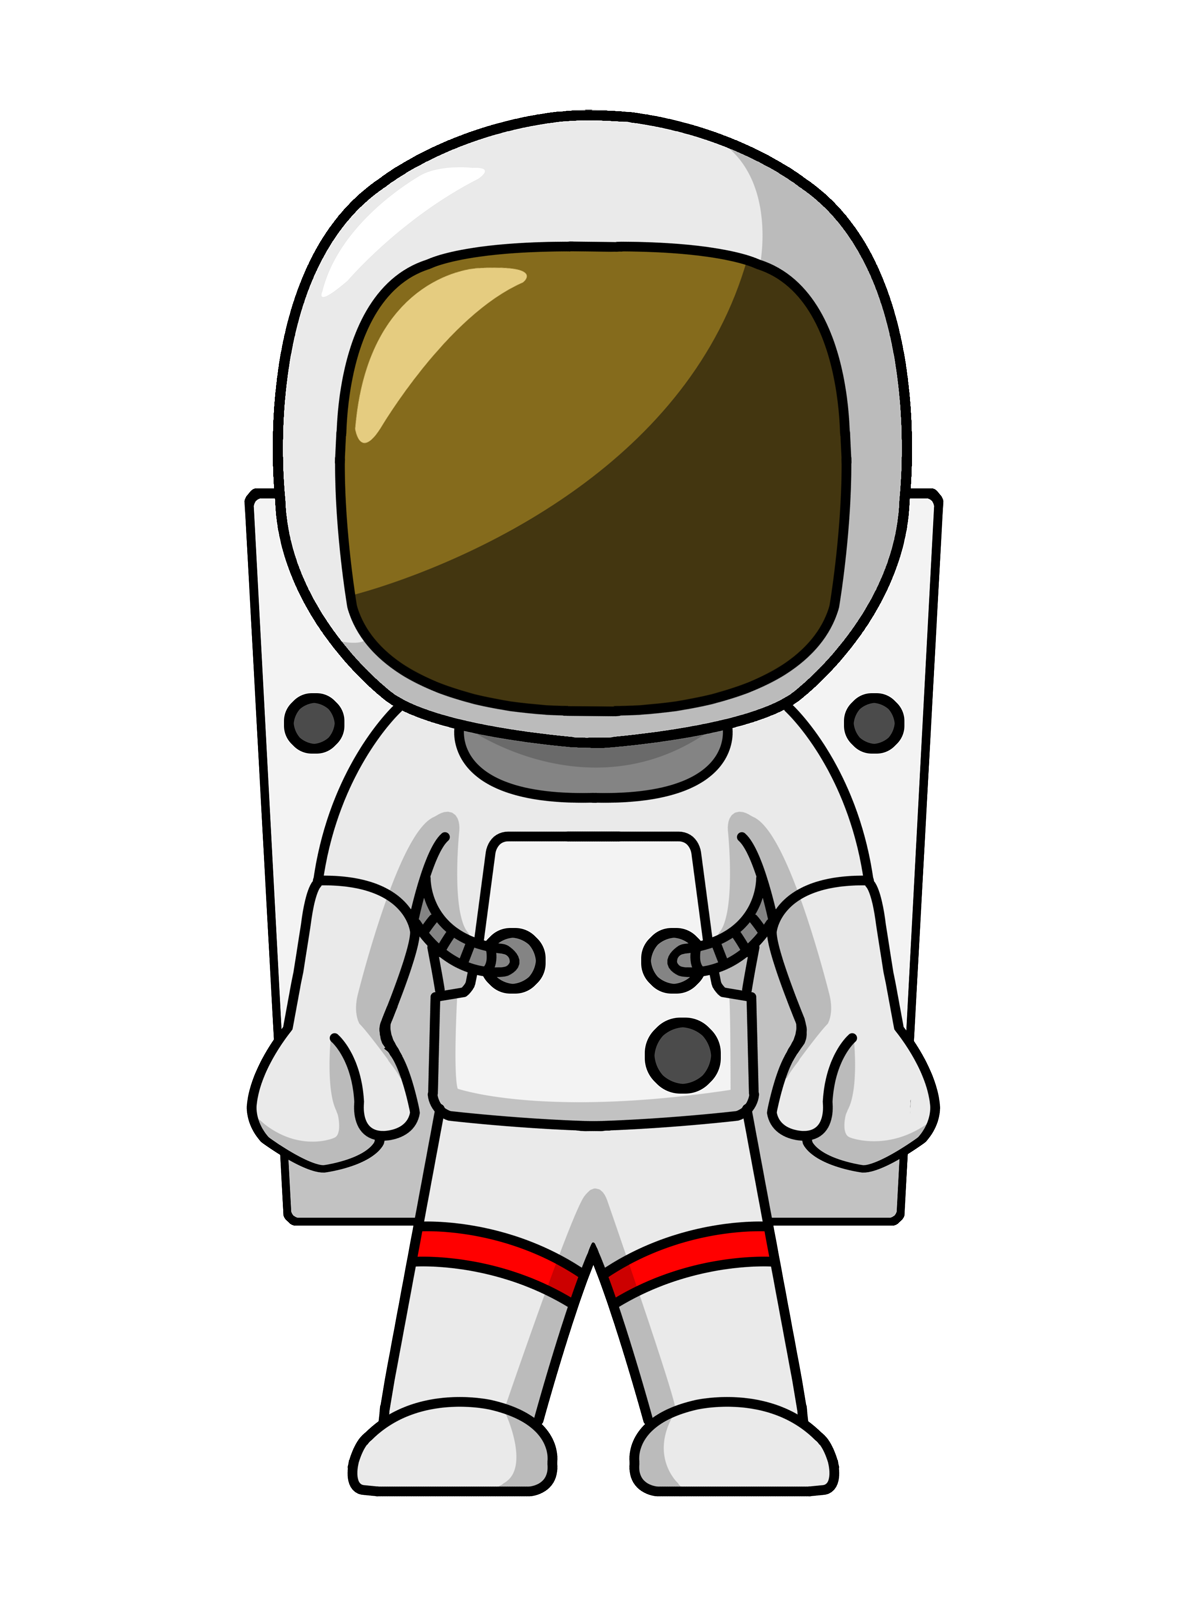 Astronaut Clip Art Images Free For Commercial Use.